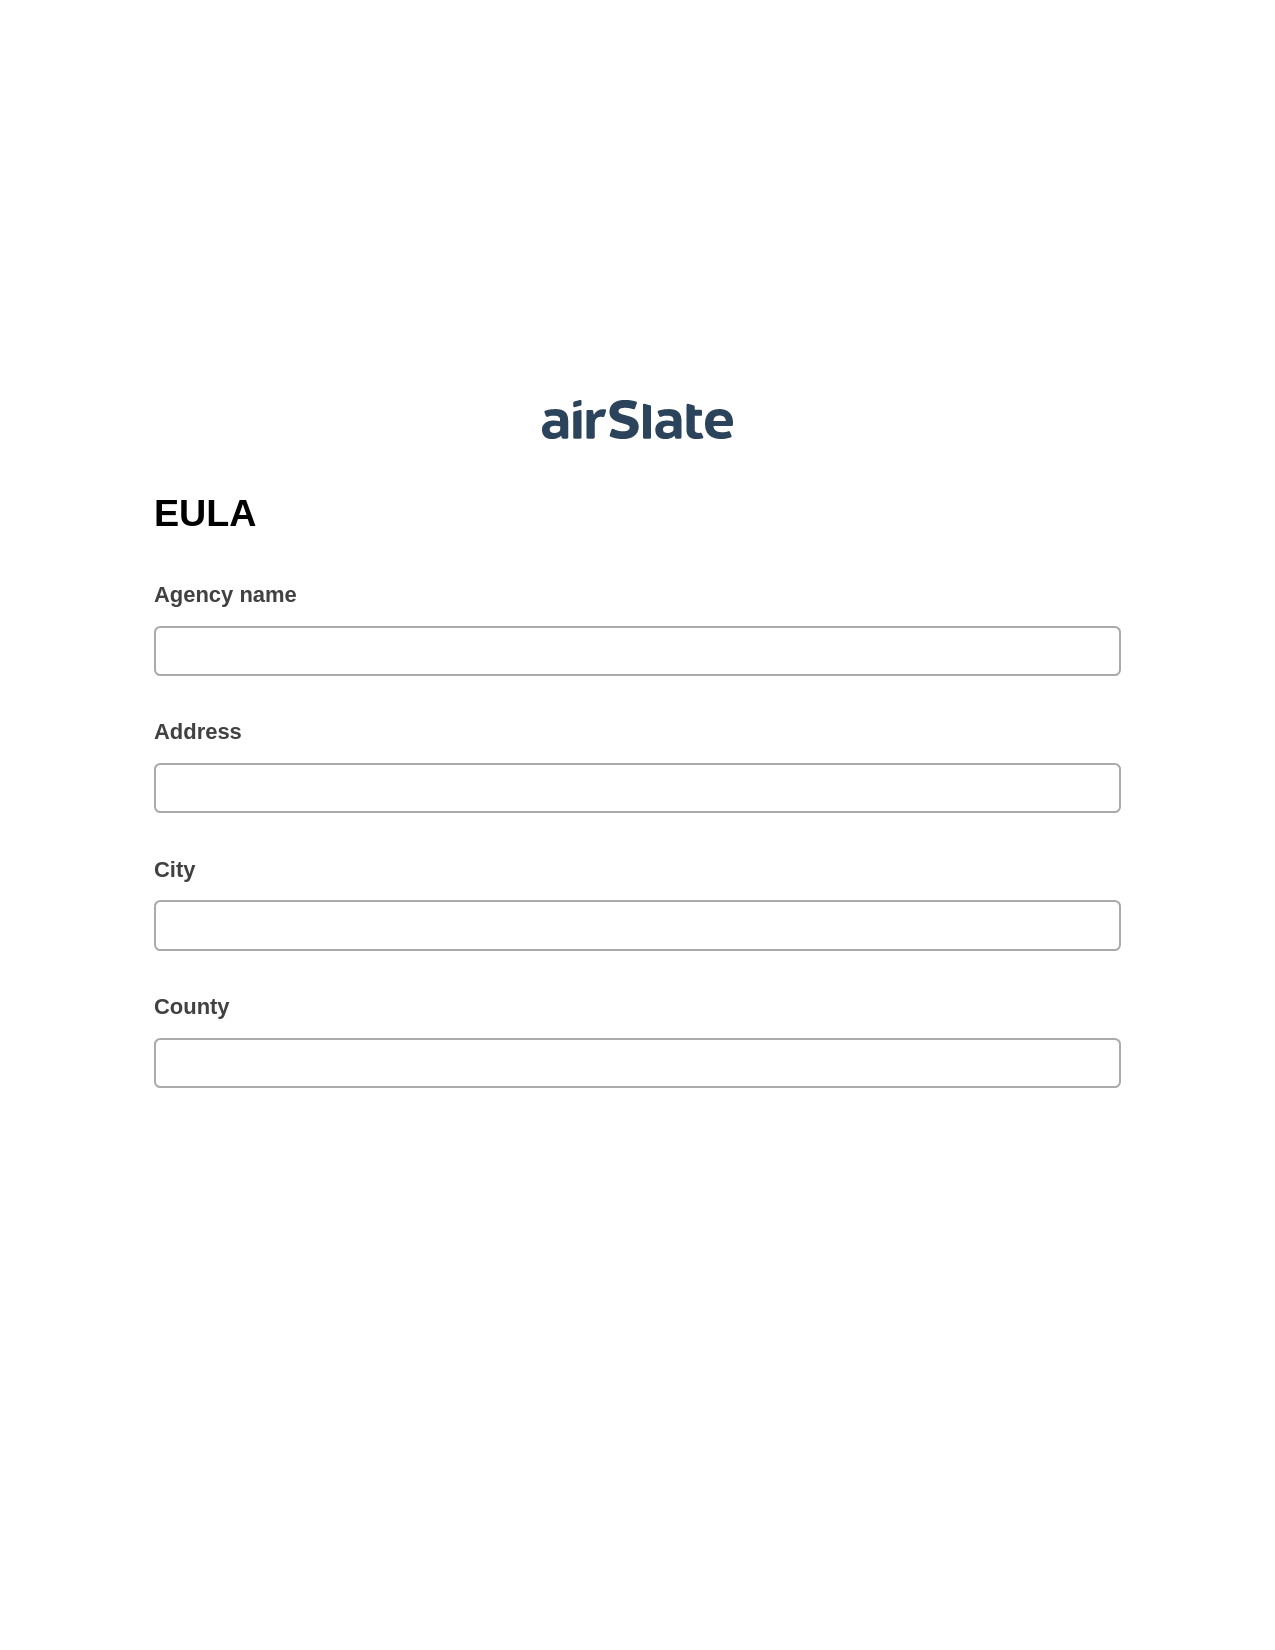 EULA Pre-fill from CSV File Dropdown Options Bot, Create slate bot, Export to Google Sheet Bot